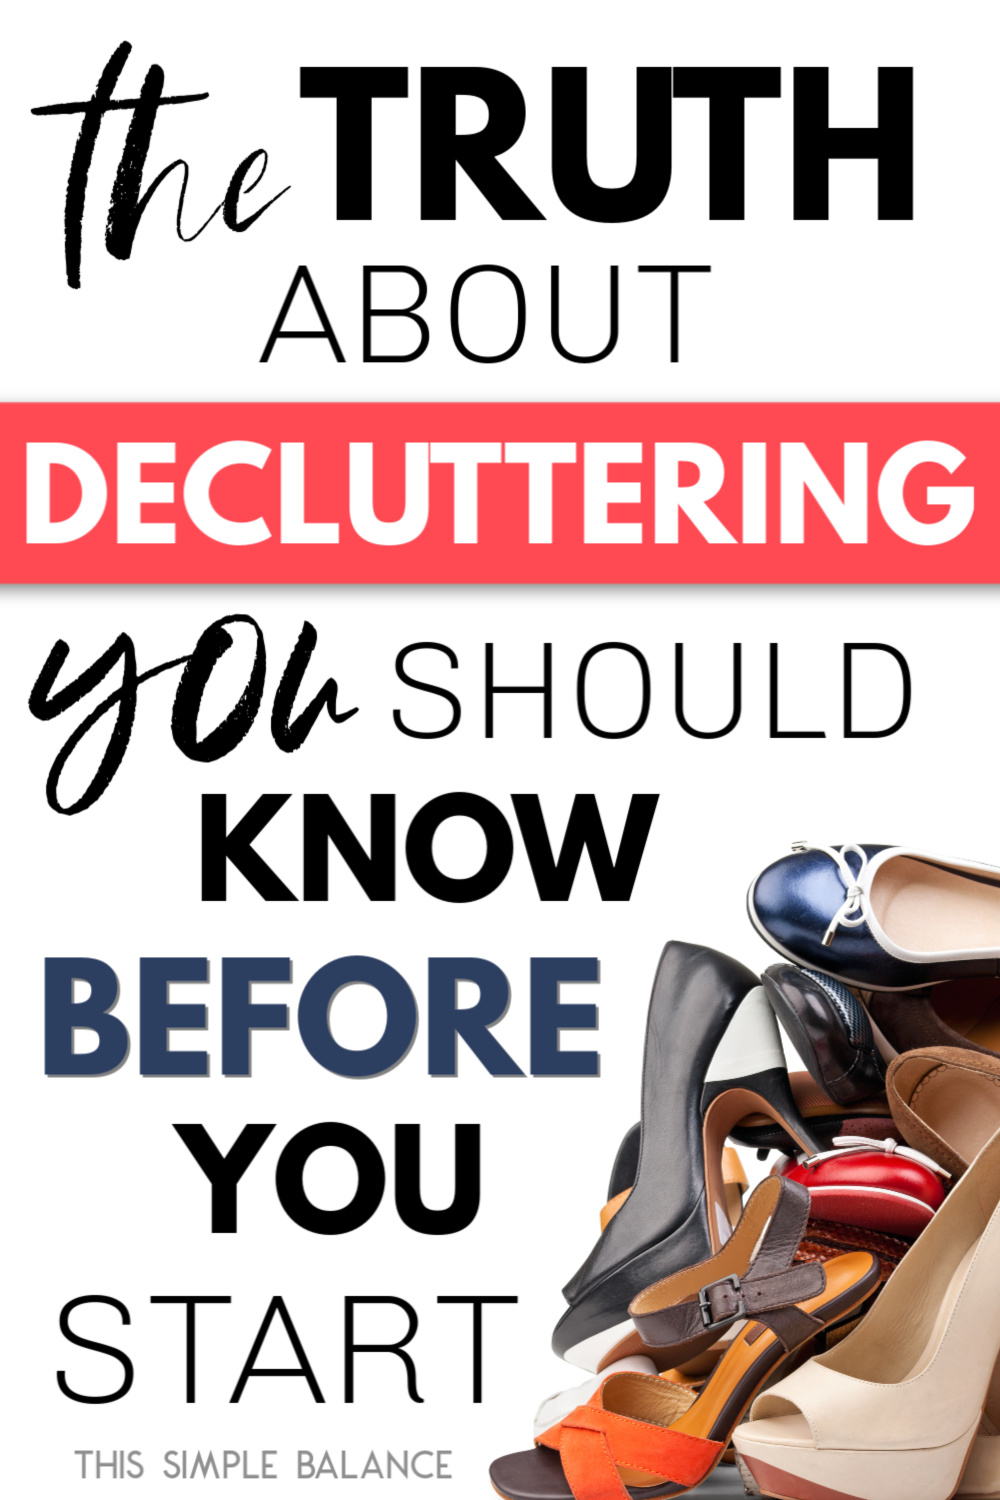 shoe pile to declutter, with text overlay, "the truth about decluttering you should know before you start"